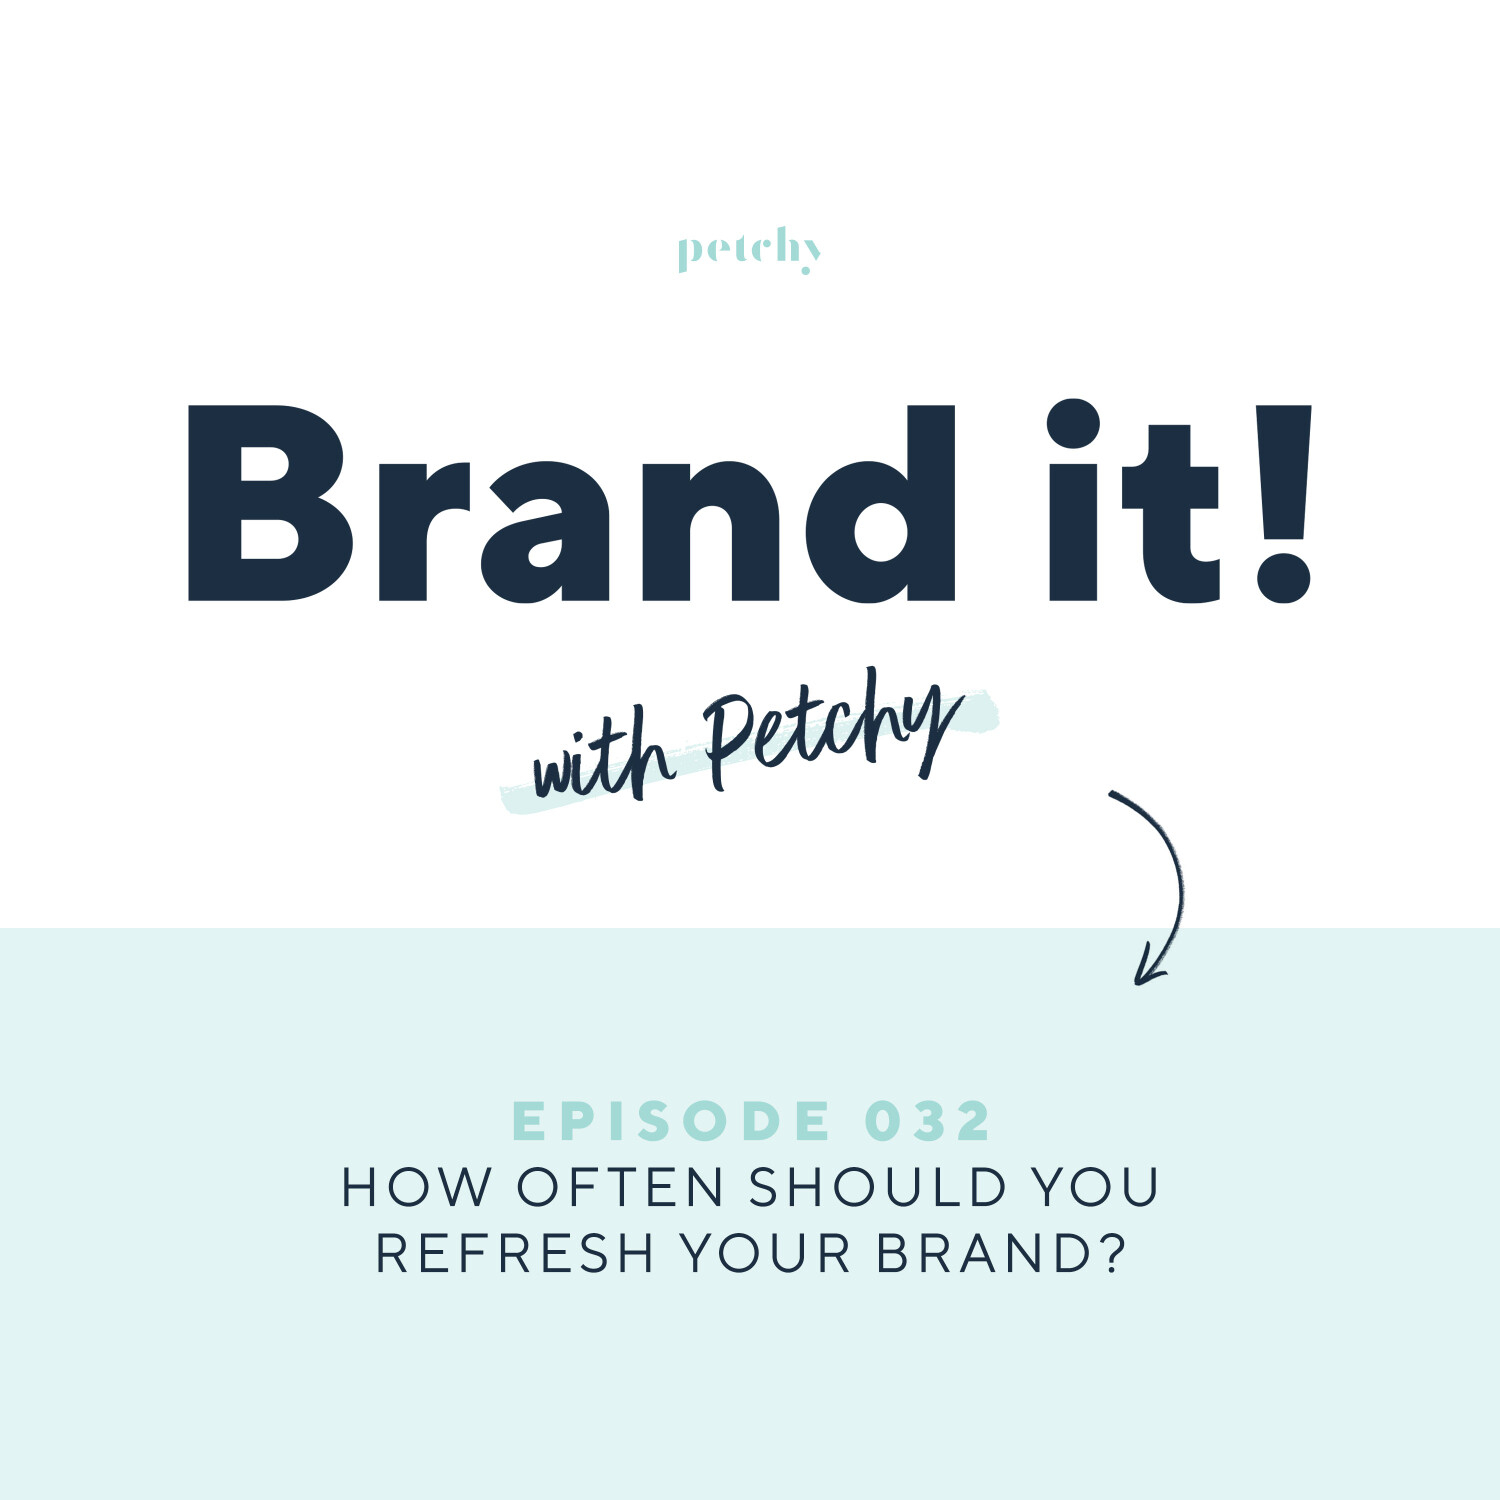 How often should you refresh your brand?